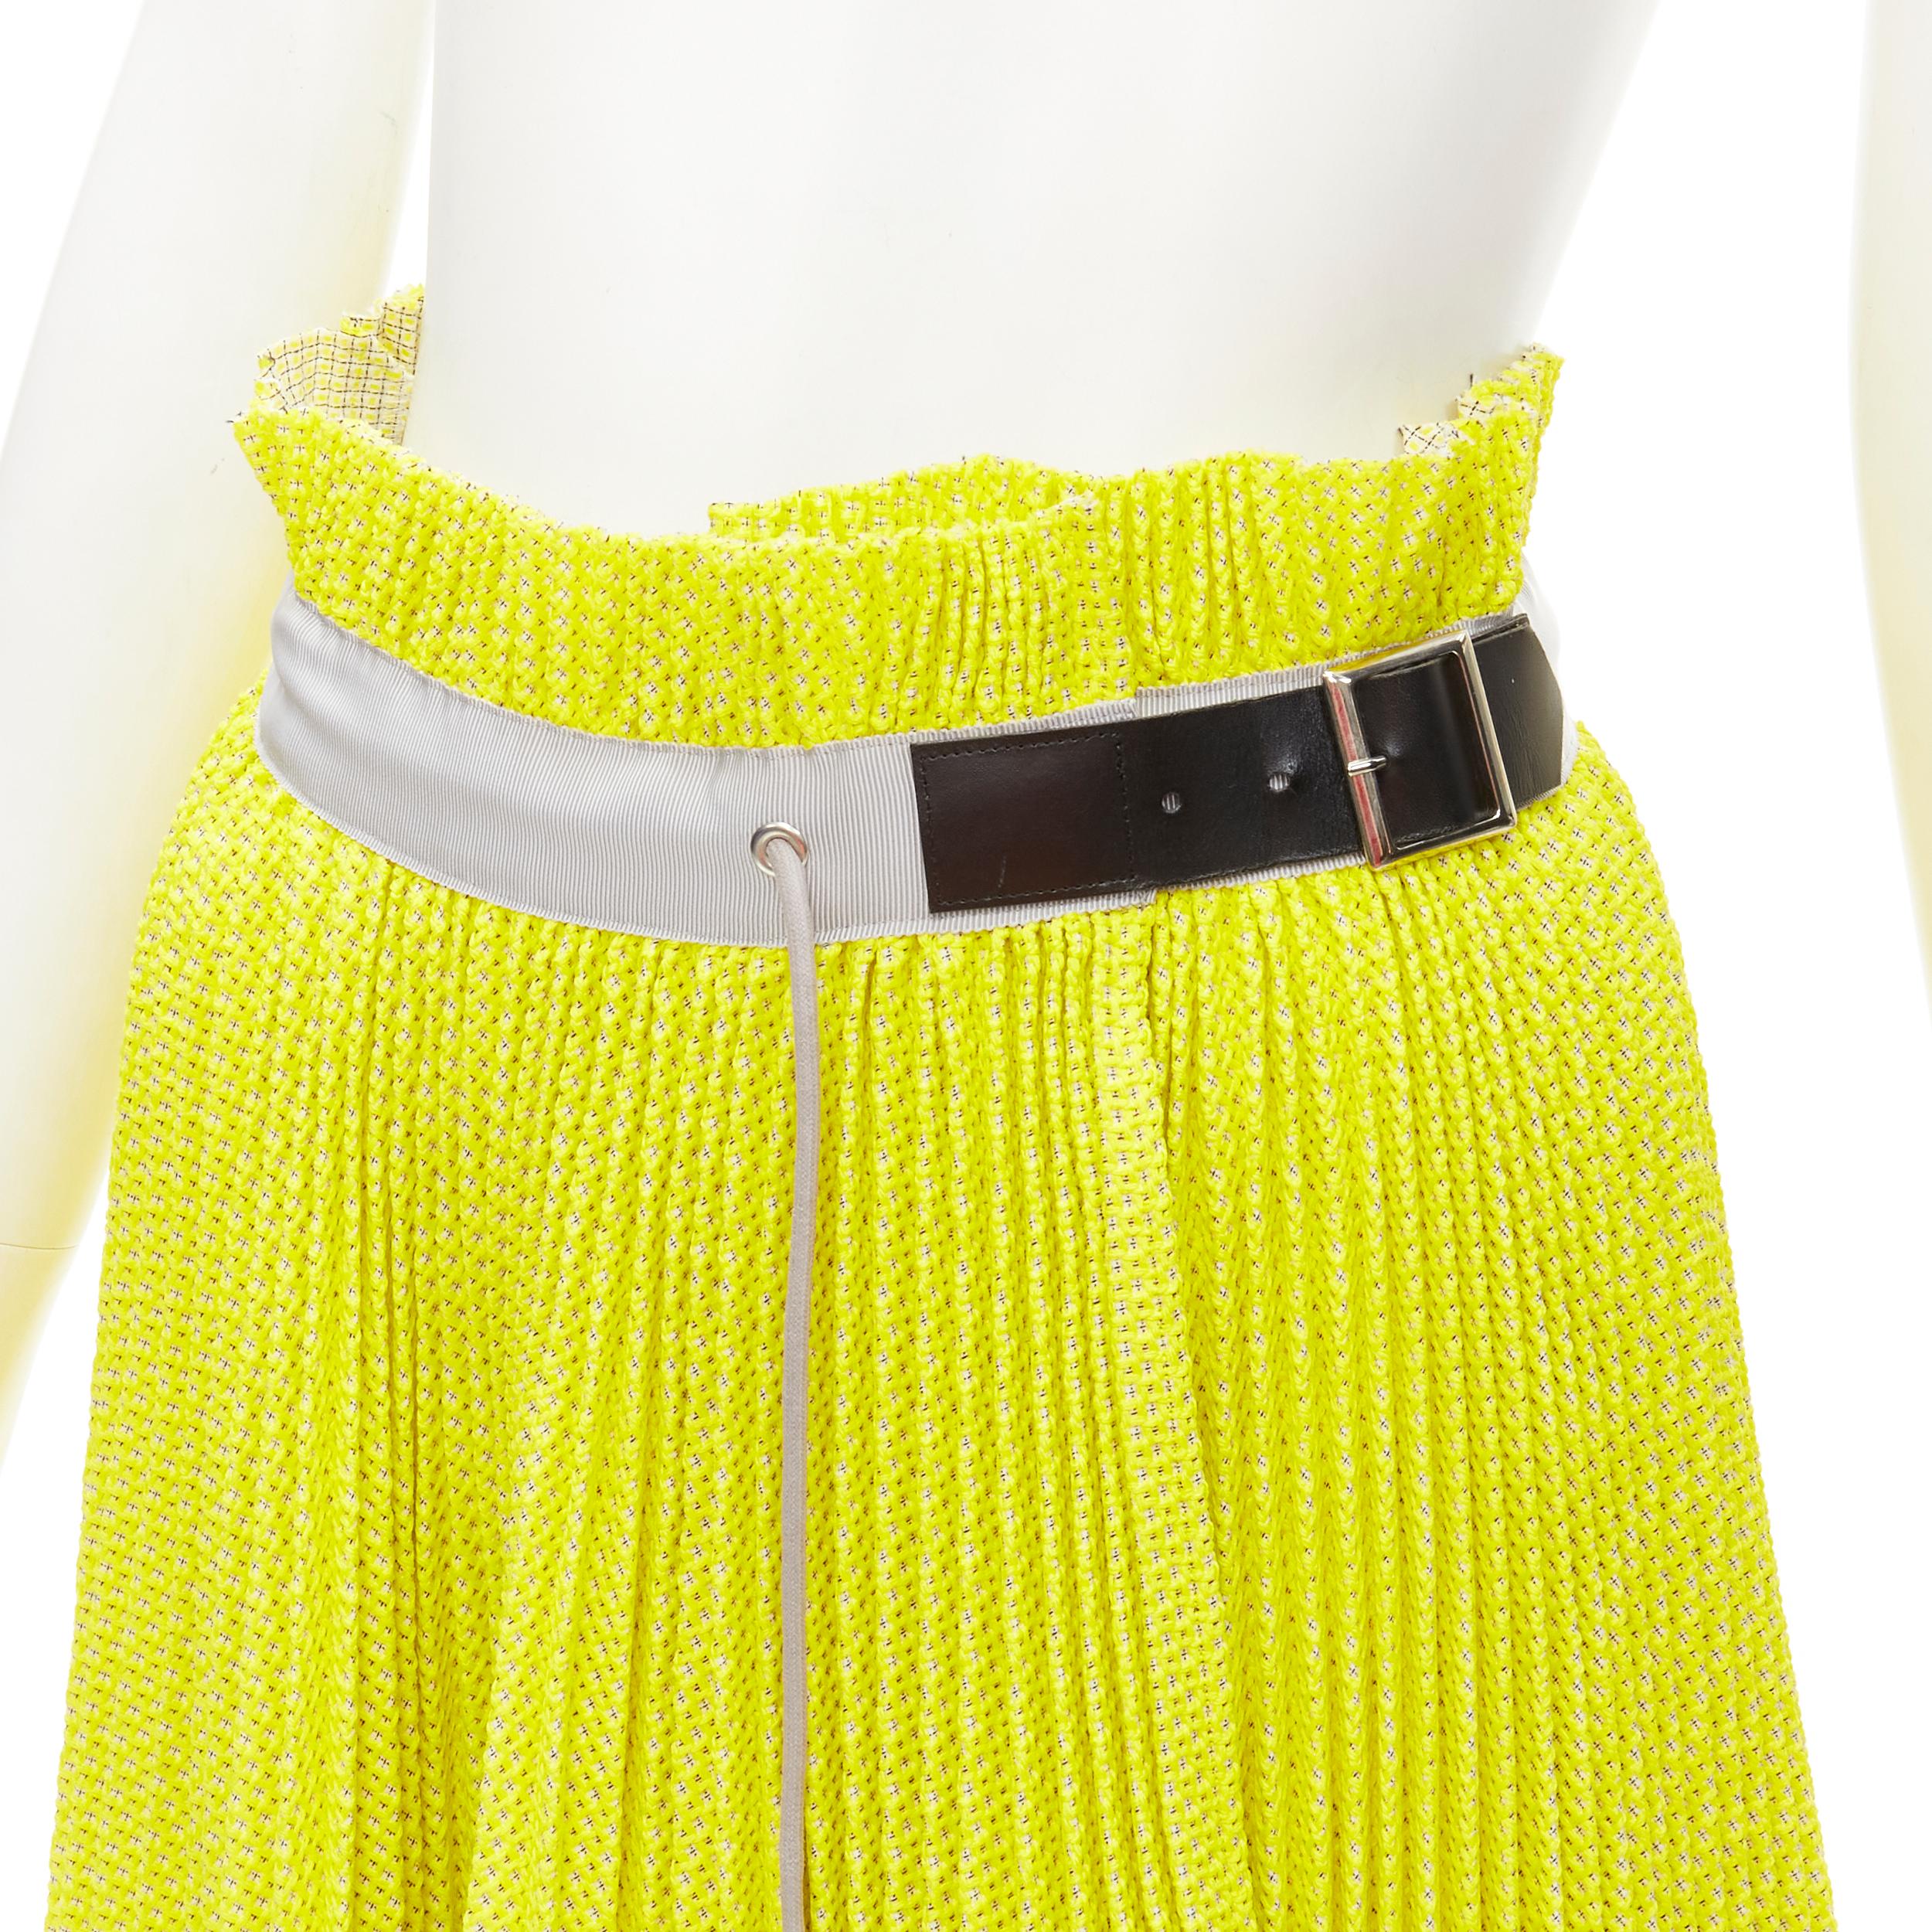 SACAI Chitose Abe yellow grey lattice deconstructed belted pleated skirt S
Brand: Sacai
Designer: Chitose Abe
Color: Yellow
Pattern: Solid
Closure: Buckle
Extra Detail: Faux leather buckle wrap skirt. Decorative drawstring detail. Thick lattice